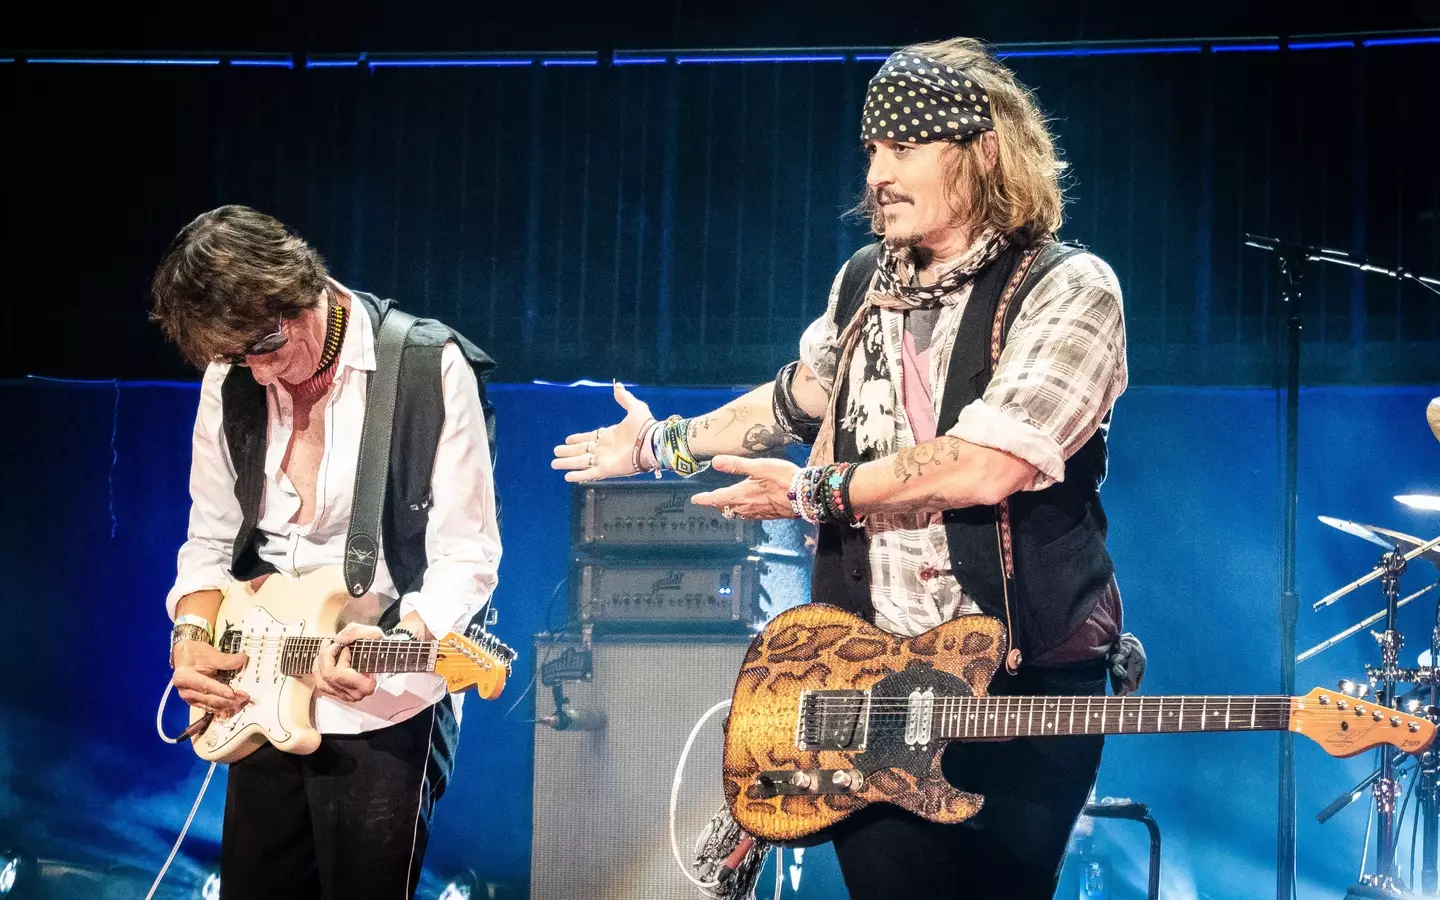 Johnny Depp and Jeff Beck are releasing an album together next week.